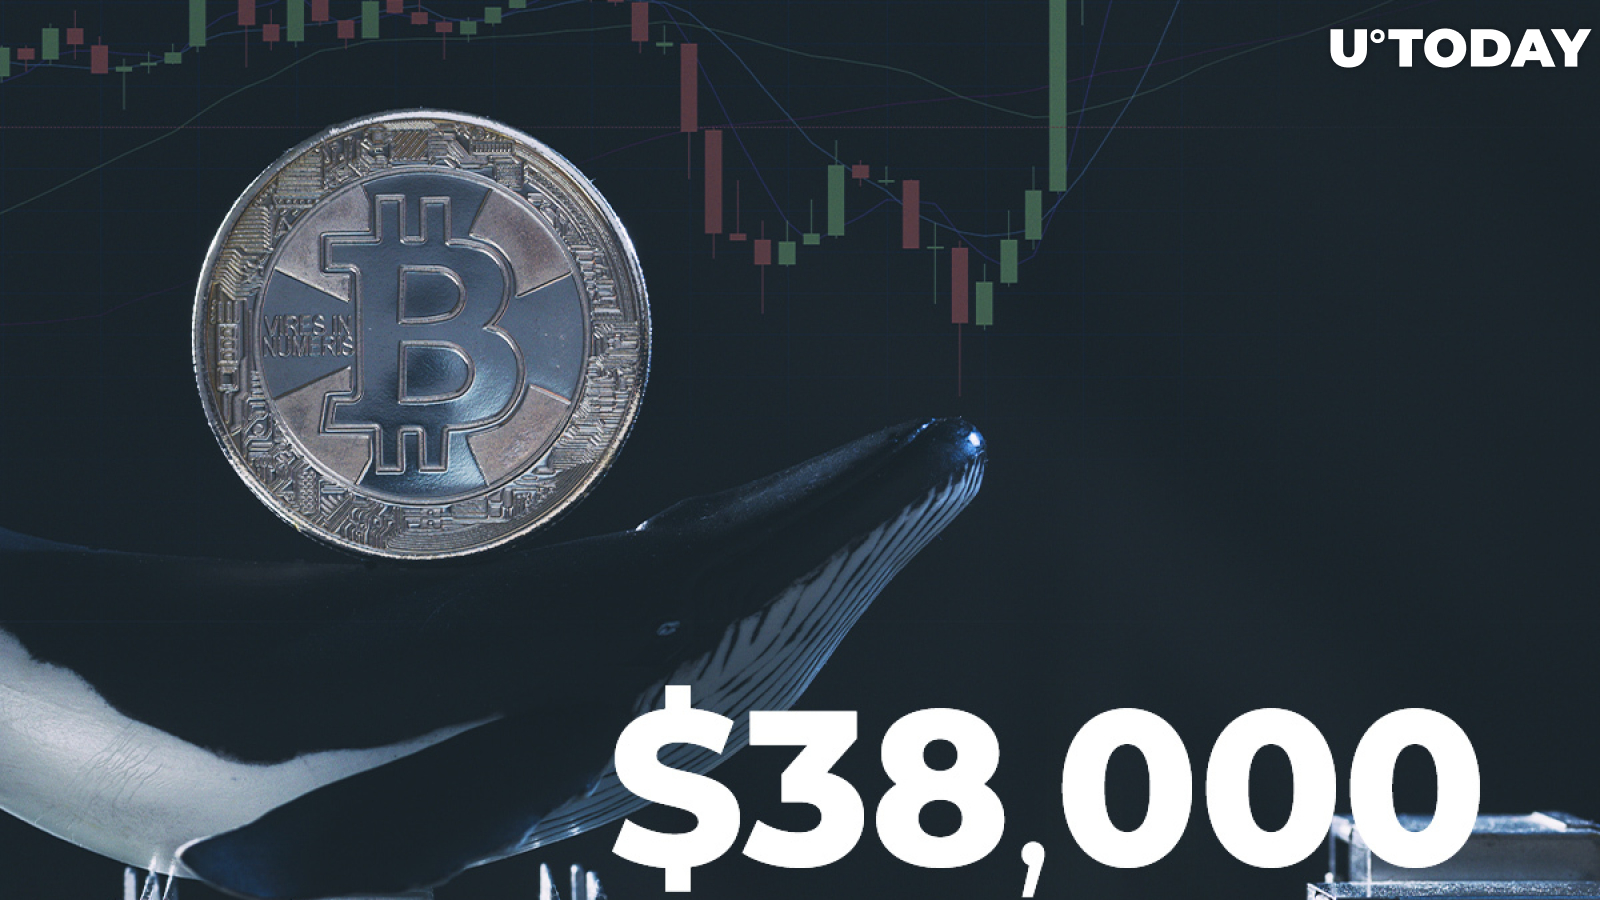 Number of Mid-Sized Bitcoin Whales Hit New All-Time High as BTC Surged Above $38,000